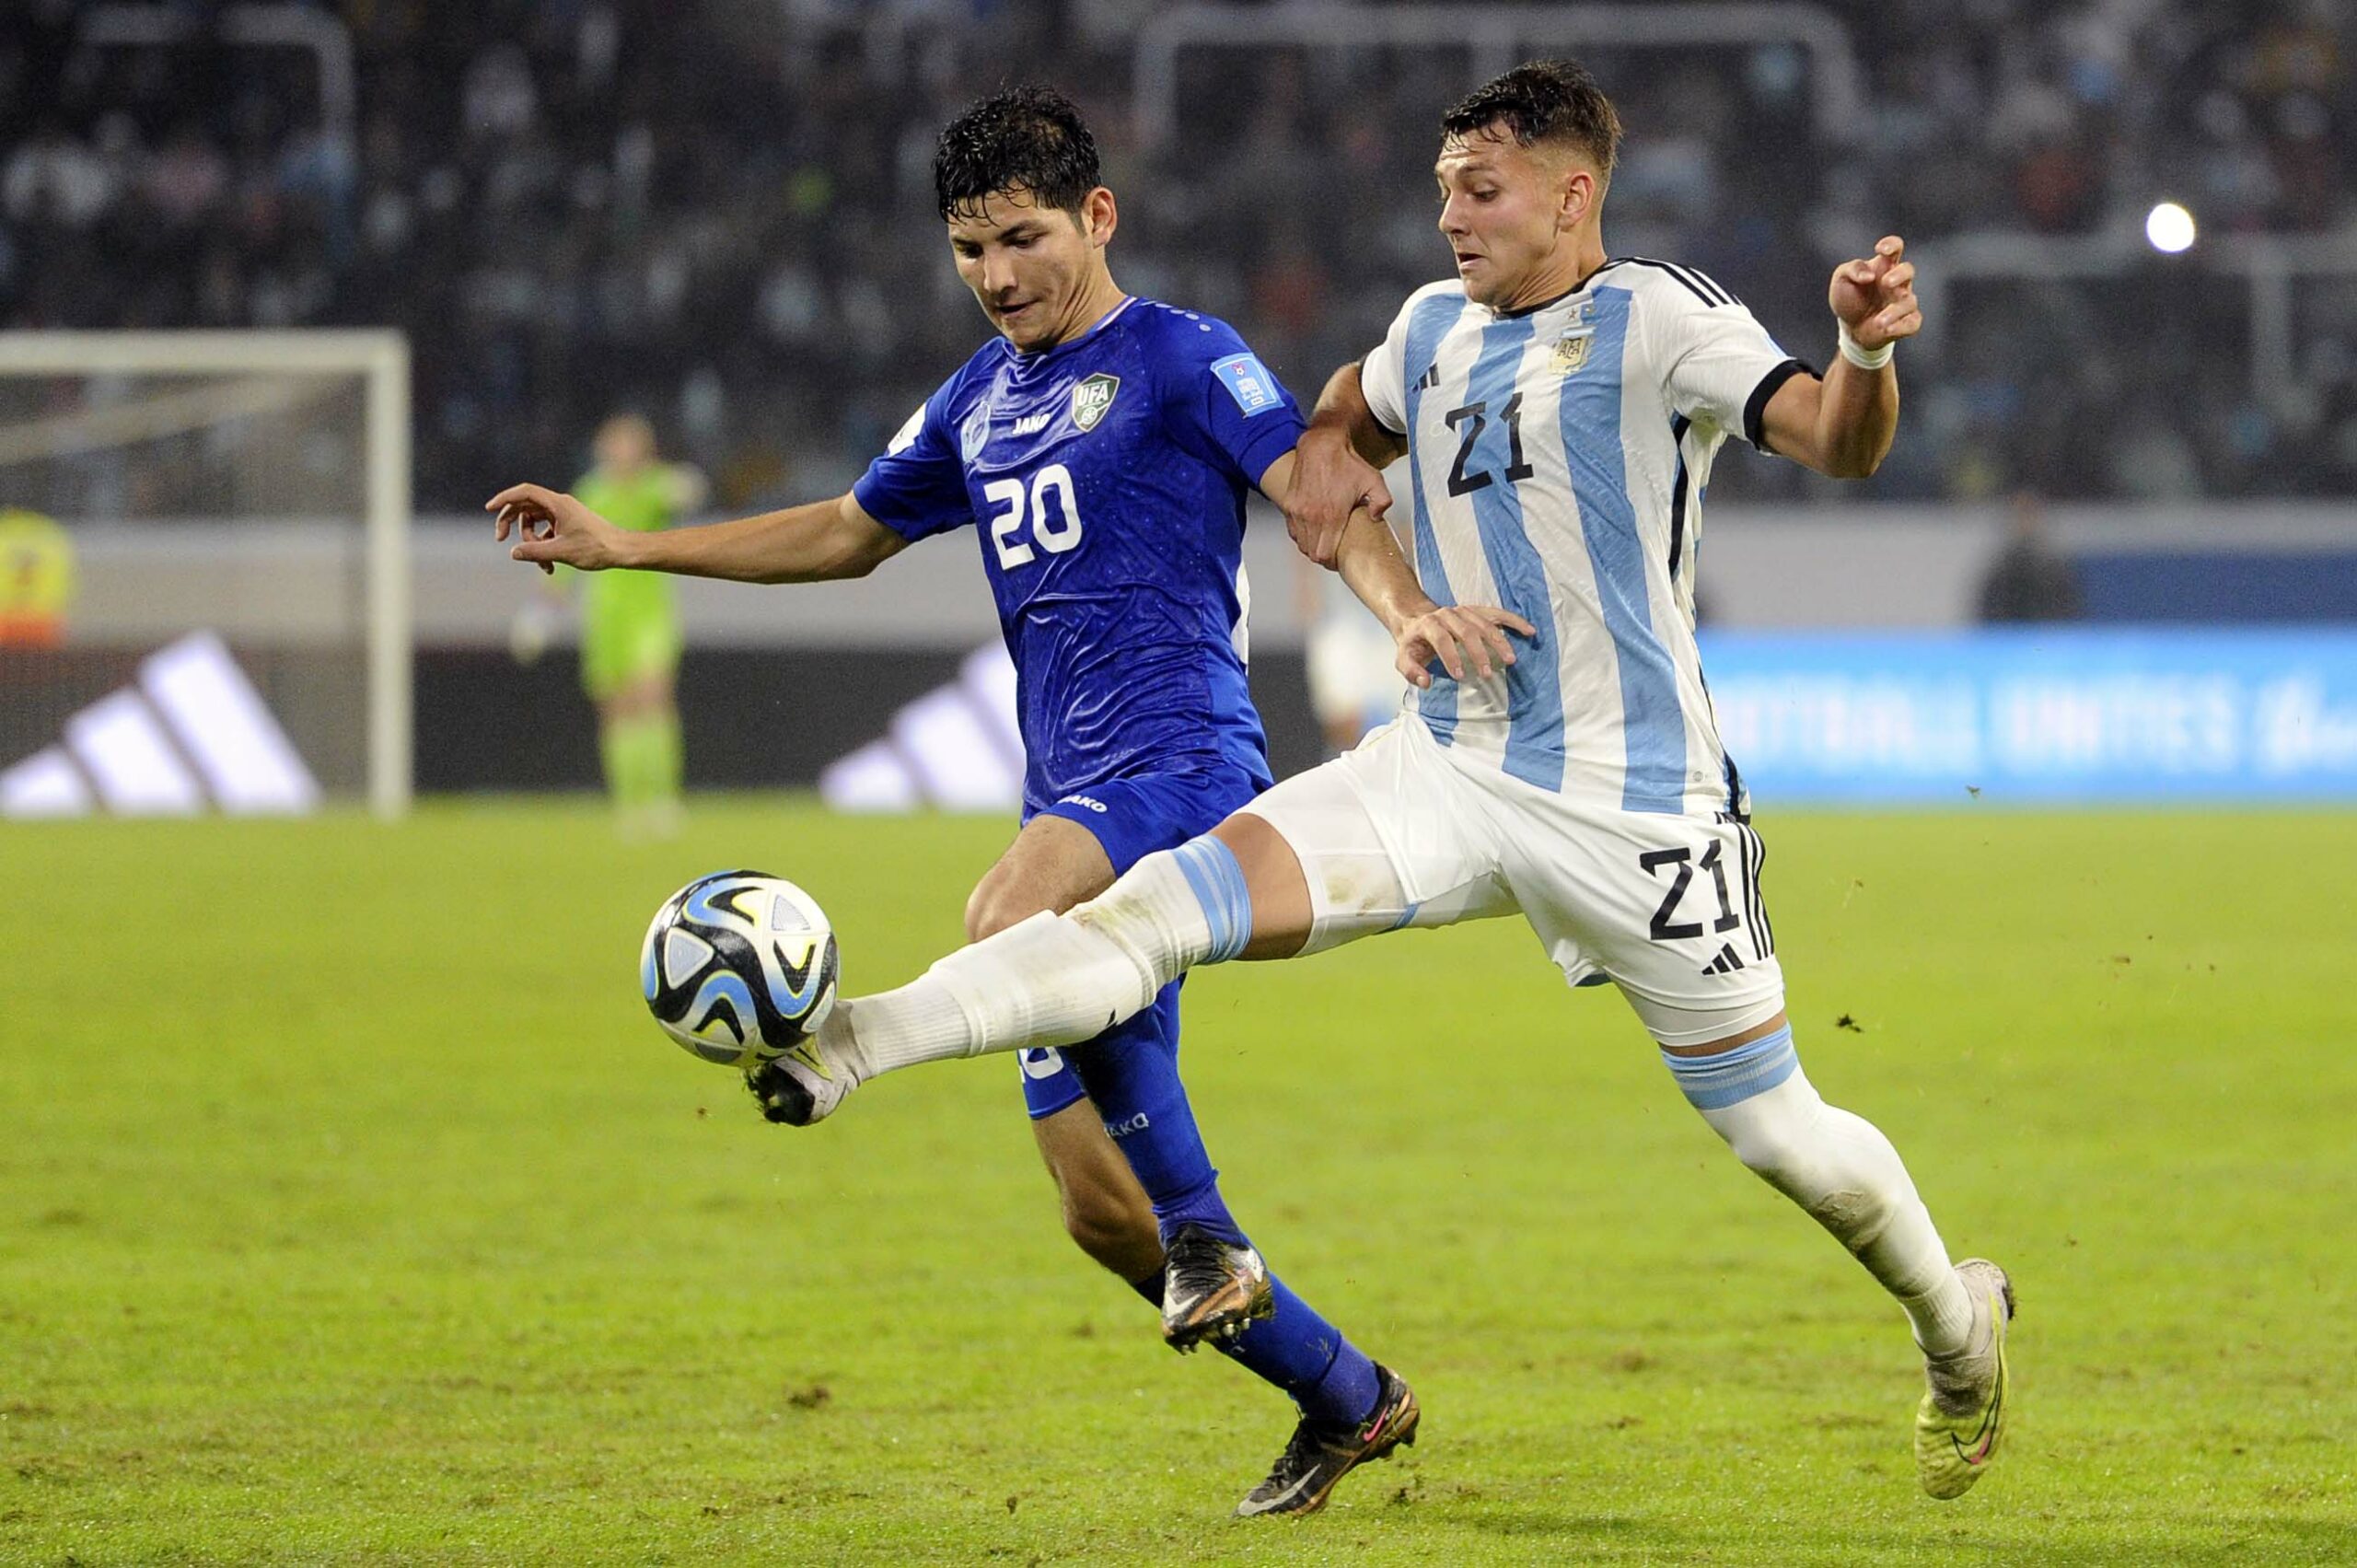 Argentina kicks off U-20 World Cup with 2-1 victory